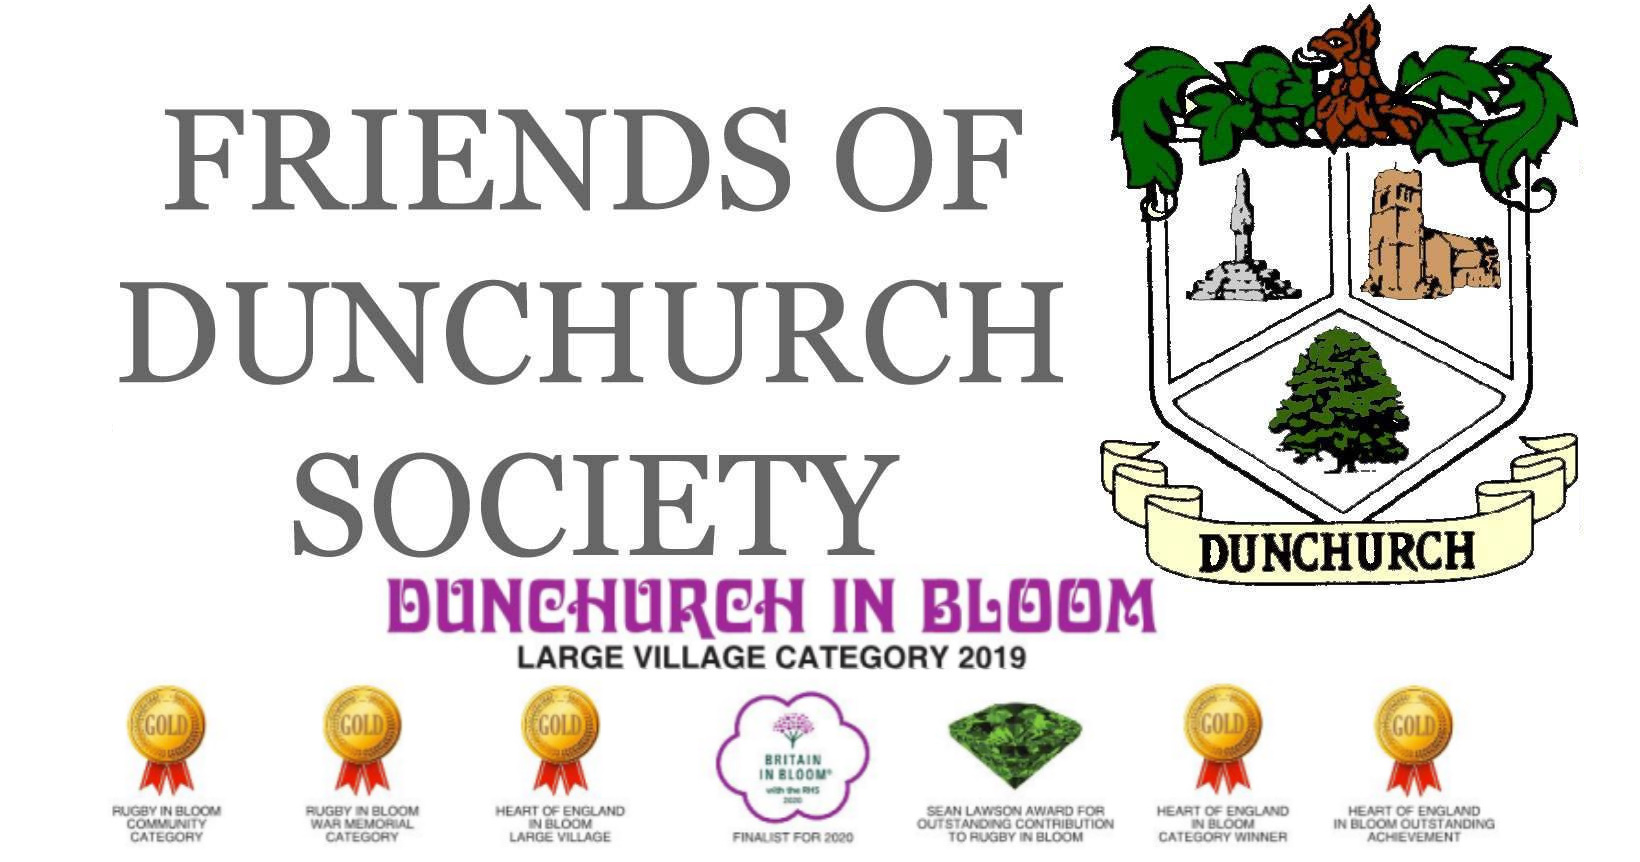 Friends of Dunchurch Society